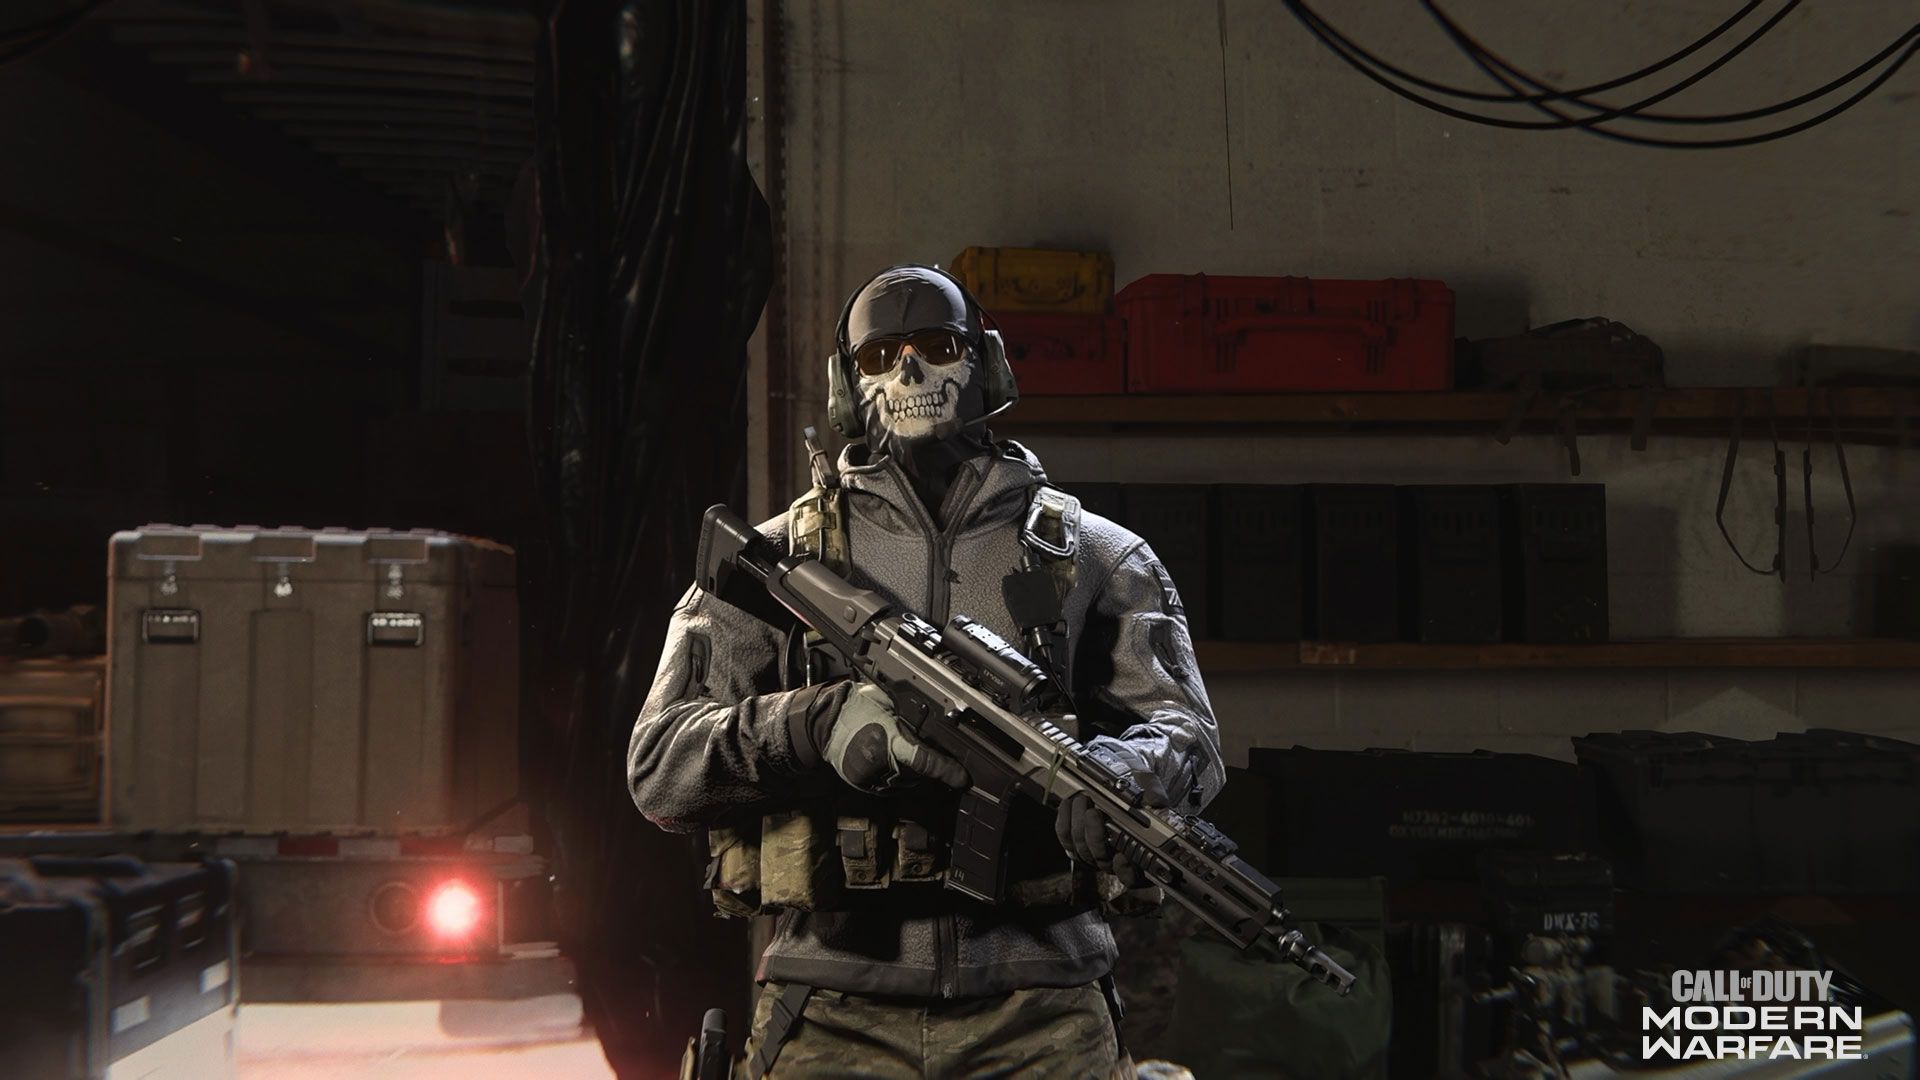 The Ghost Pack Contingency Bundle features iconic items for the SAS Operator including the 'Classic Ghost' skin